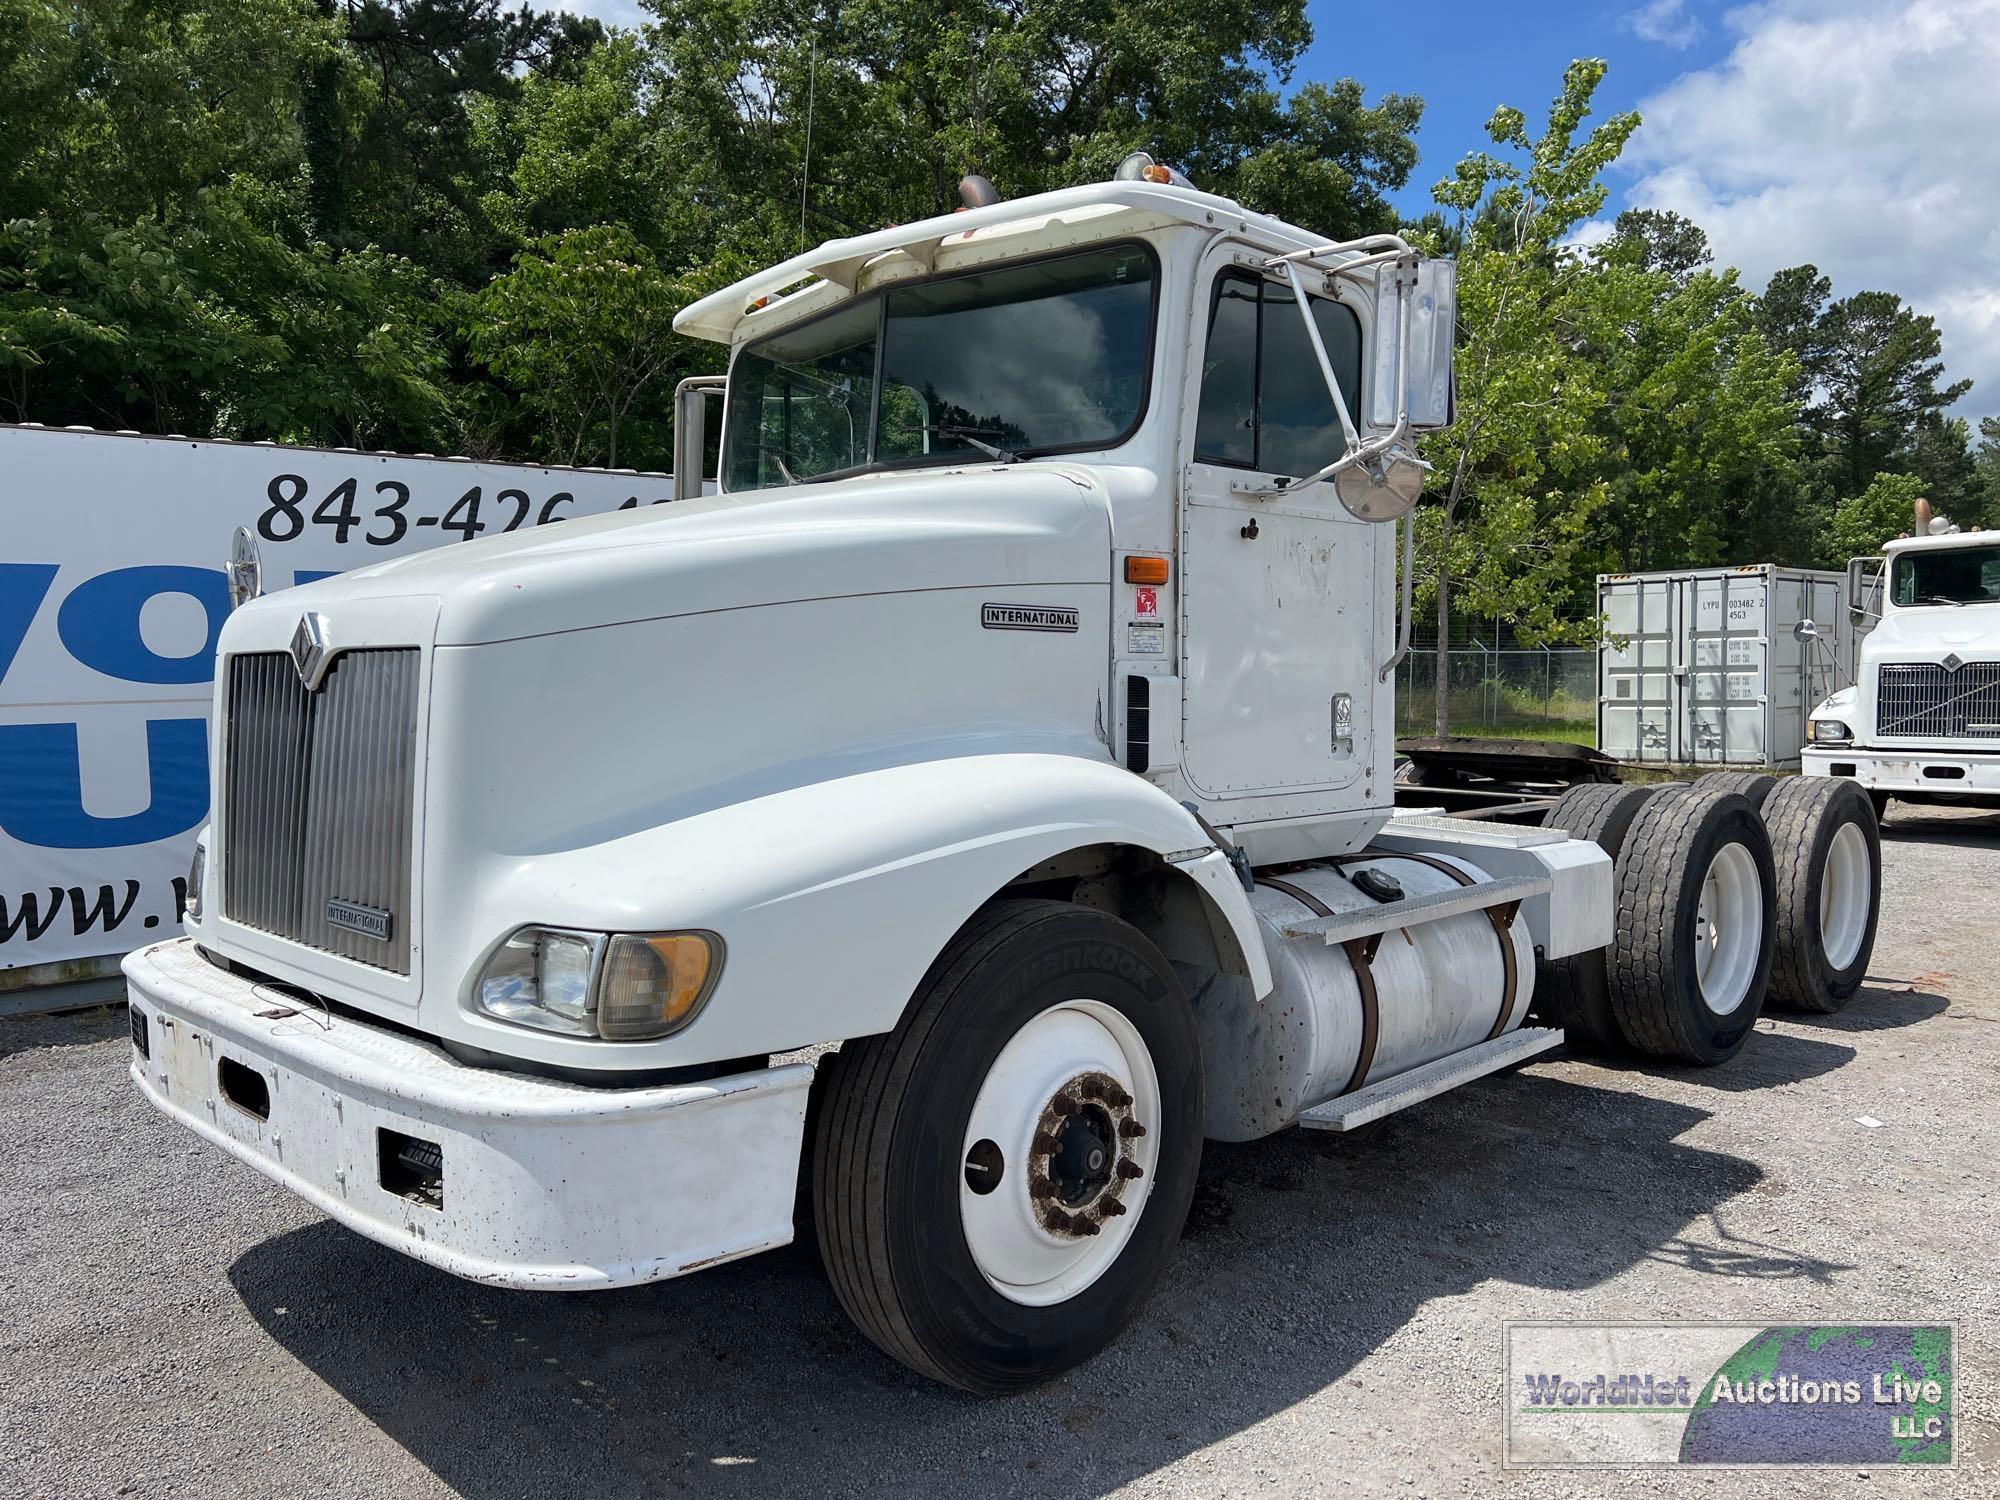 1997 INTERNATIONAL 9200 DAY CAB ROAD TRACTOR, VIN # 2HSFMAMR5VC031555